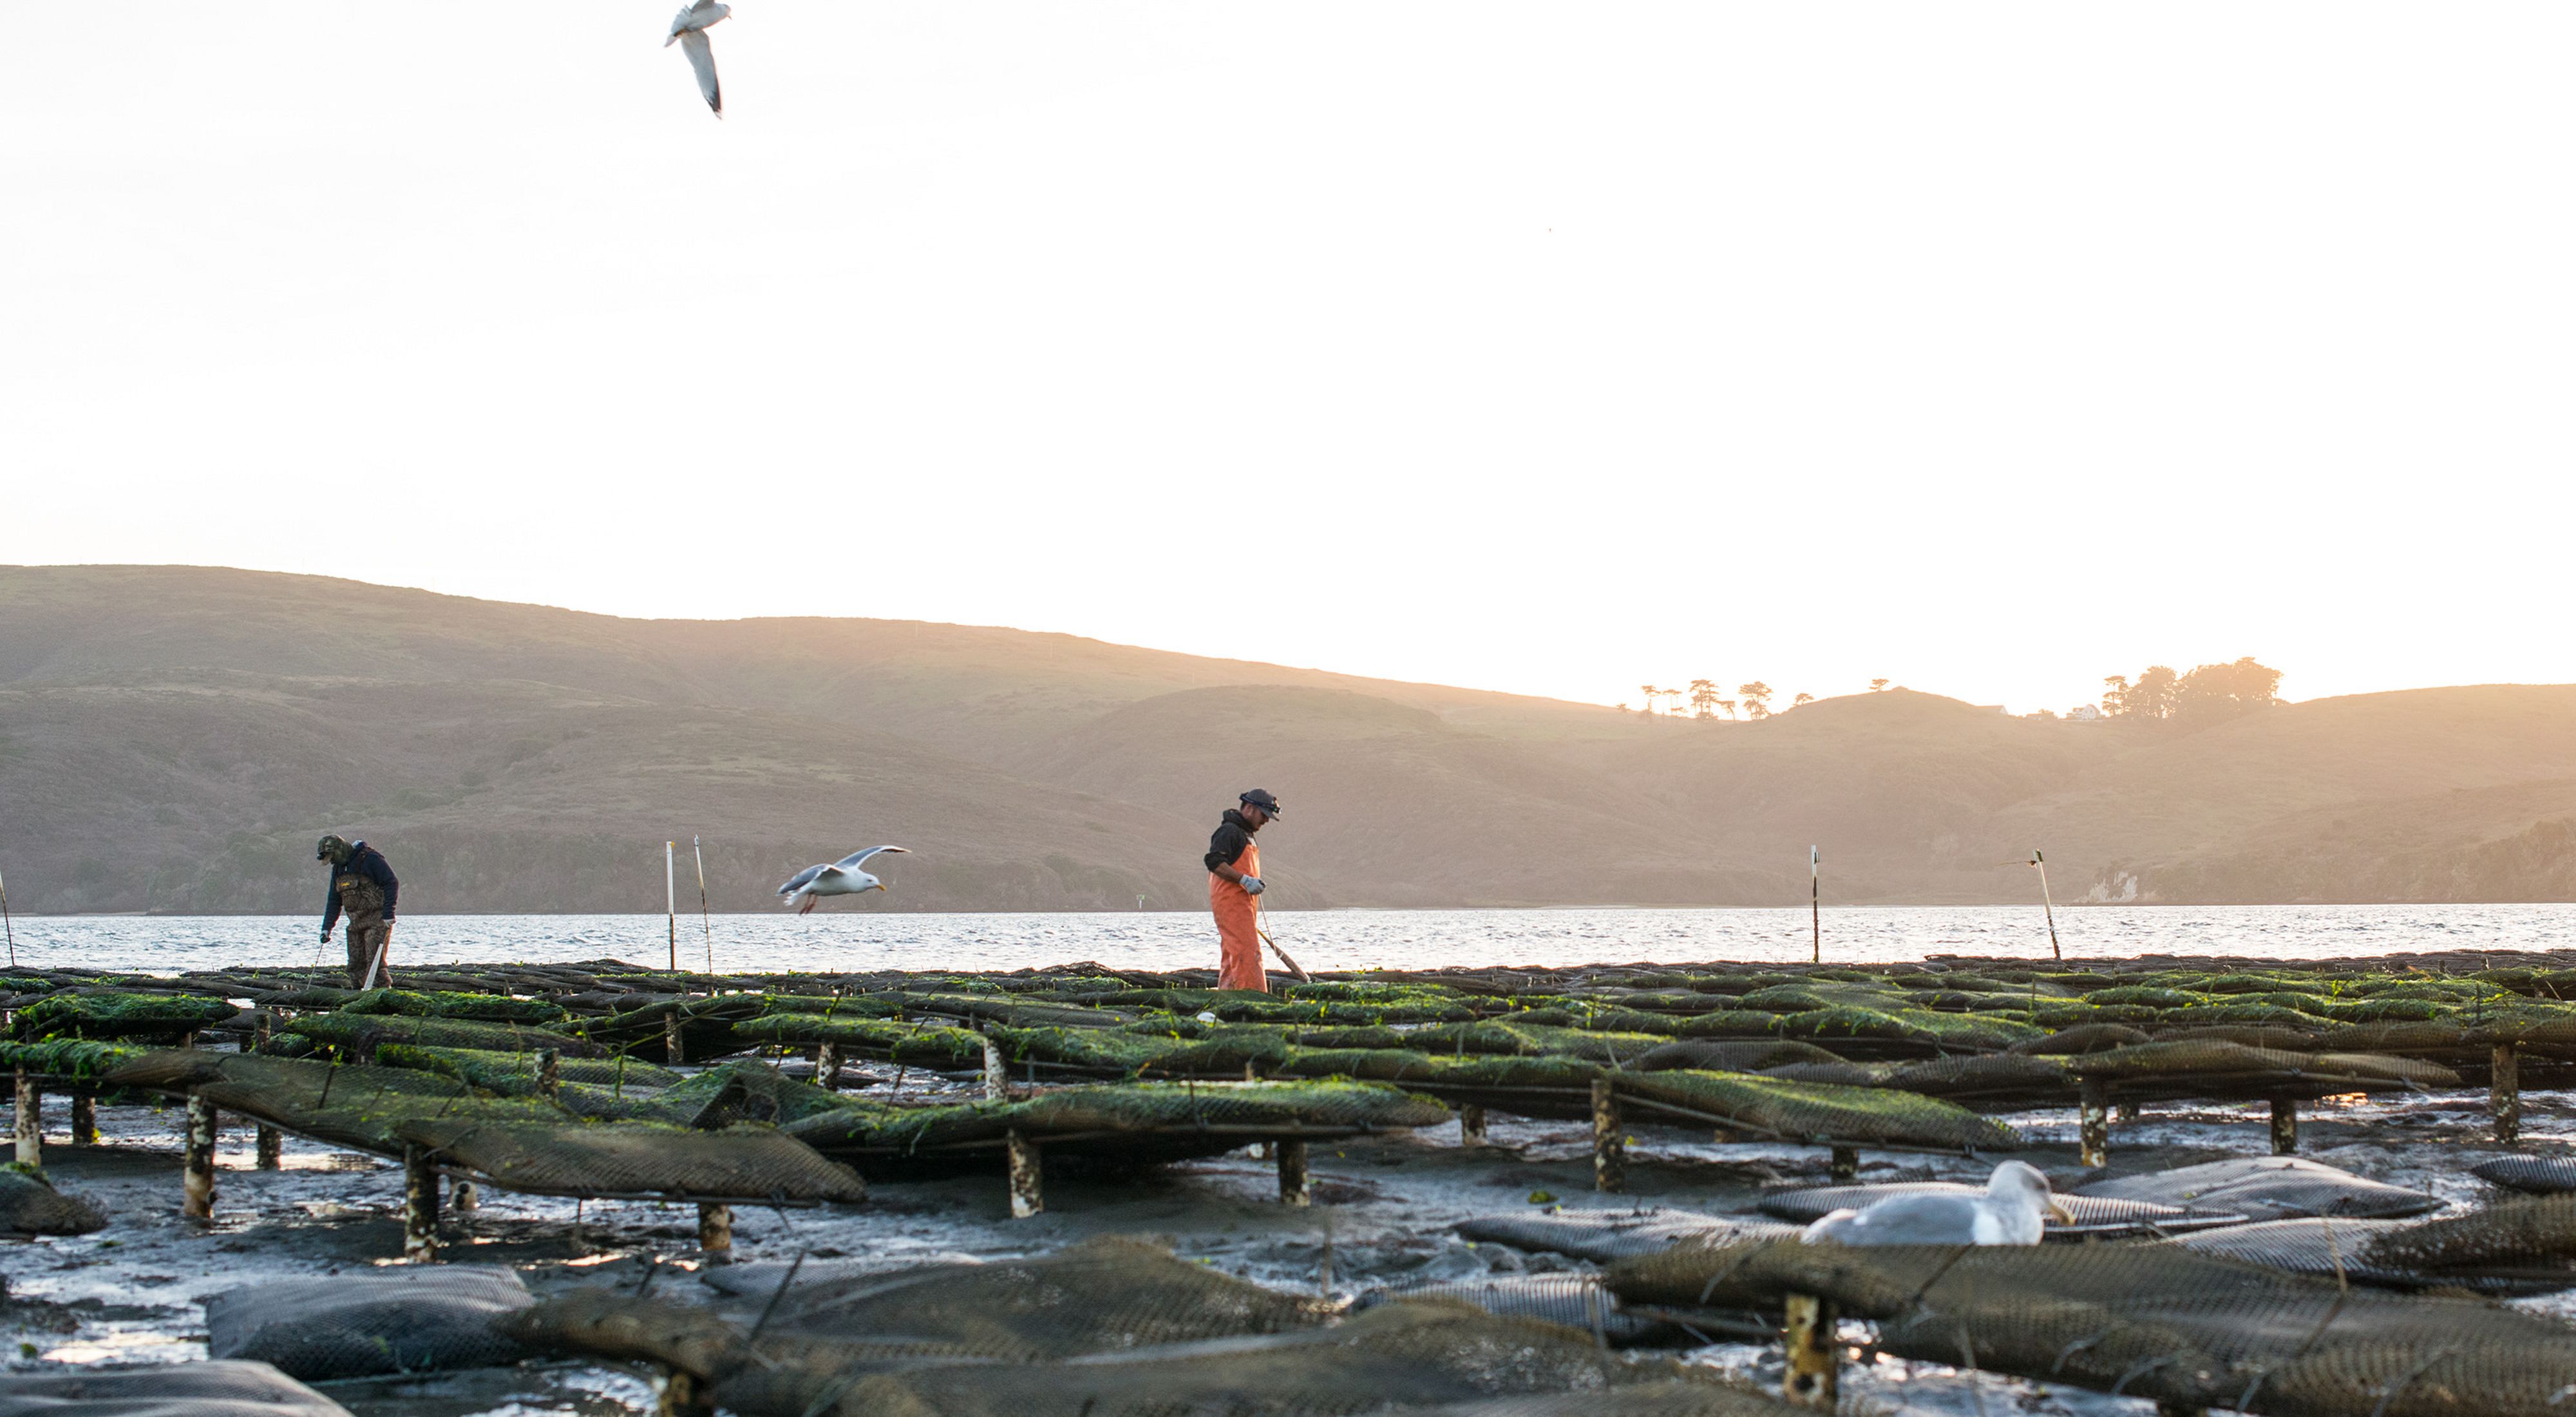 Workers at sunrise at Hog Island Oyster Farm on Tomales Bay in Marshall, California. 